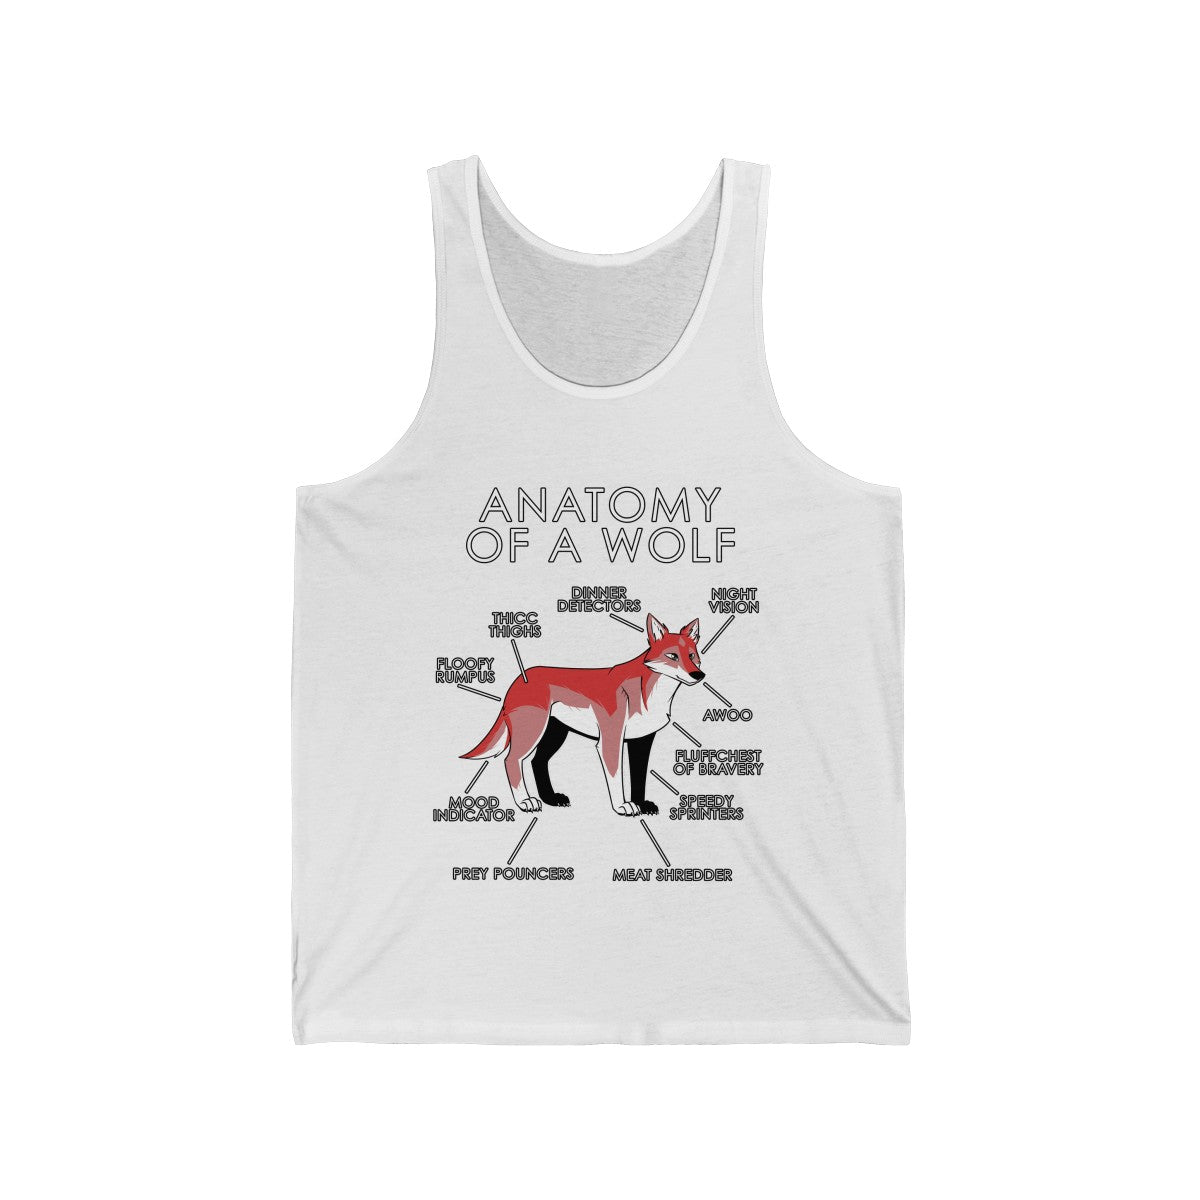 Wolf Red - Tank Top Tank Top Artworktee White XS 